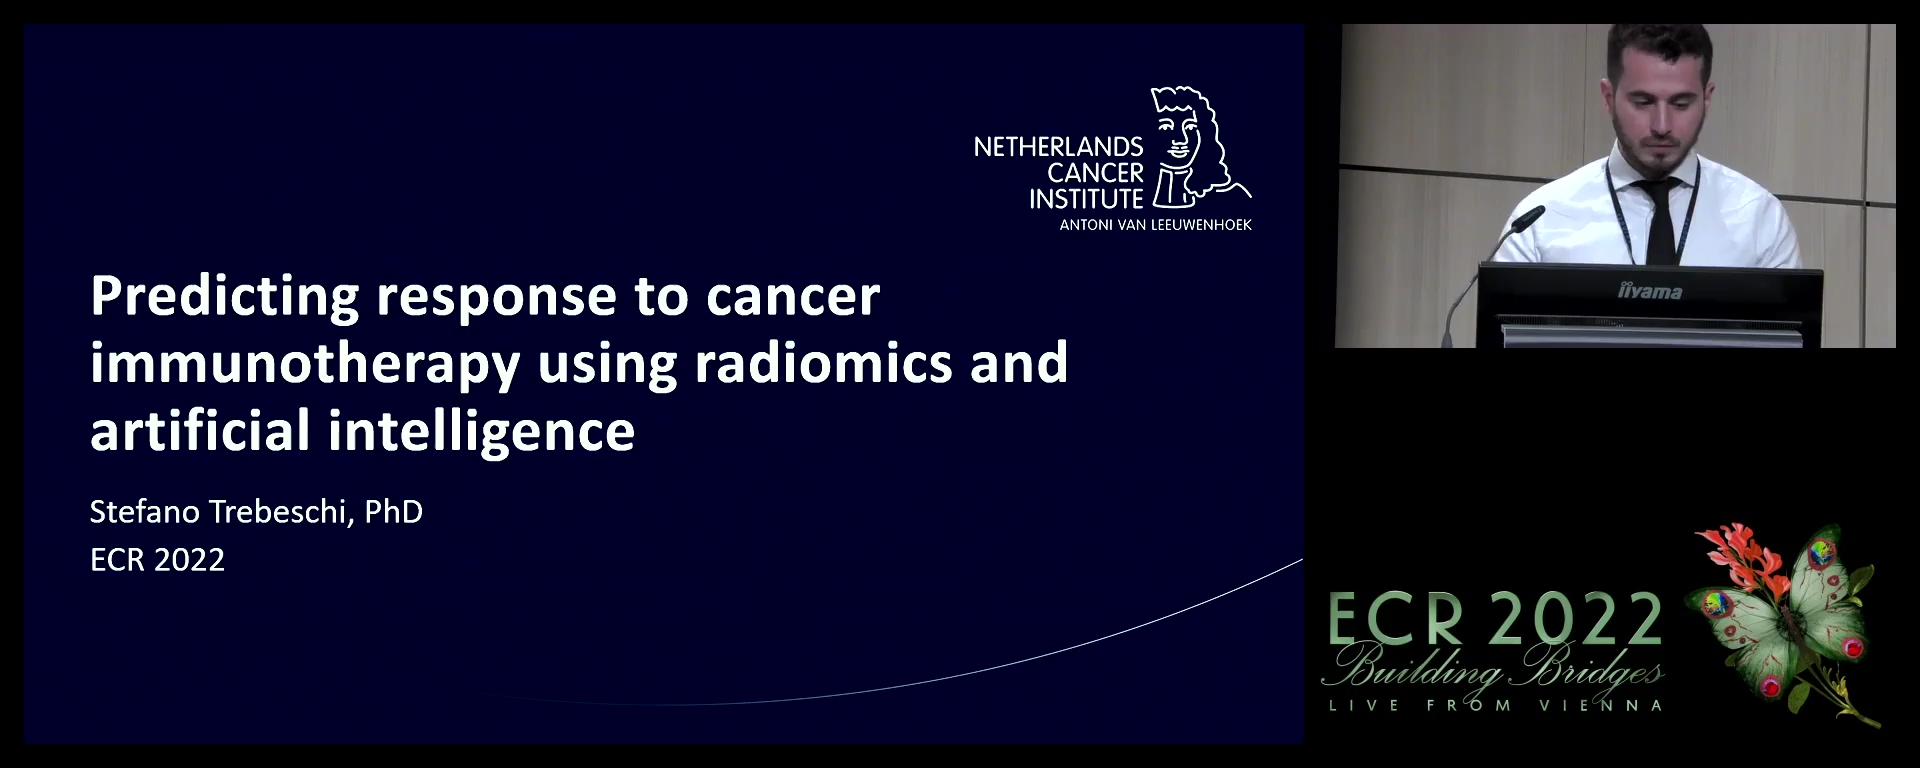 Predicting response to cancer immunotherapy using radiomics and artificial intelligence